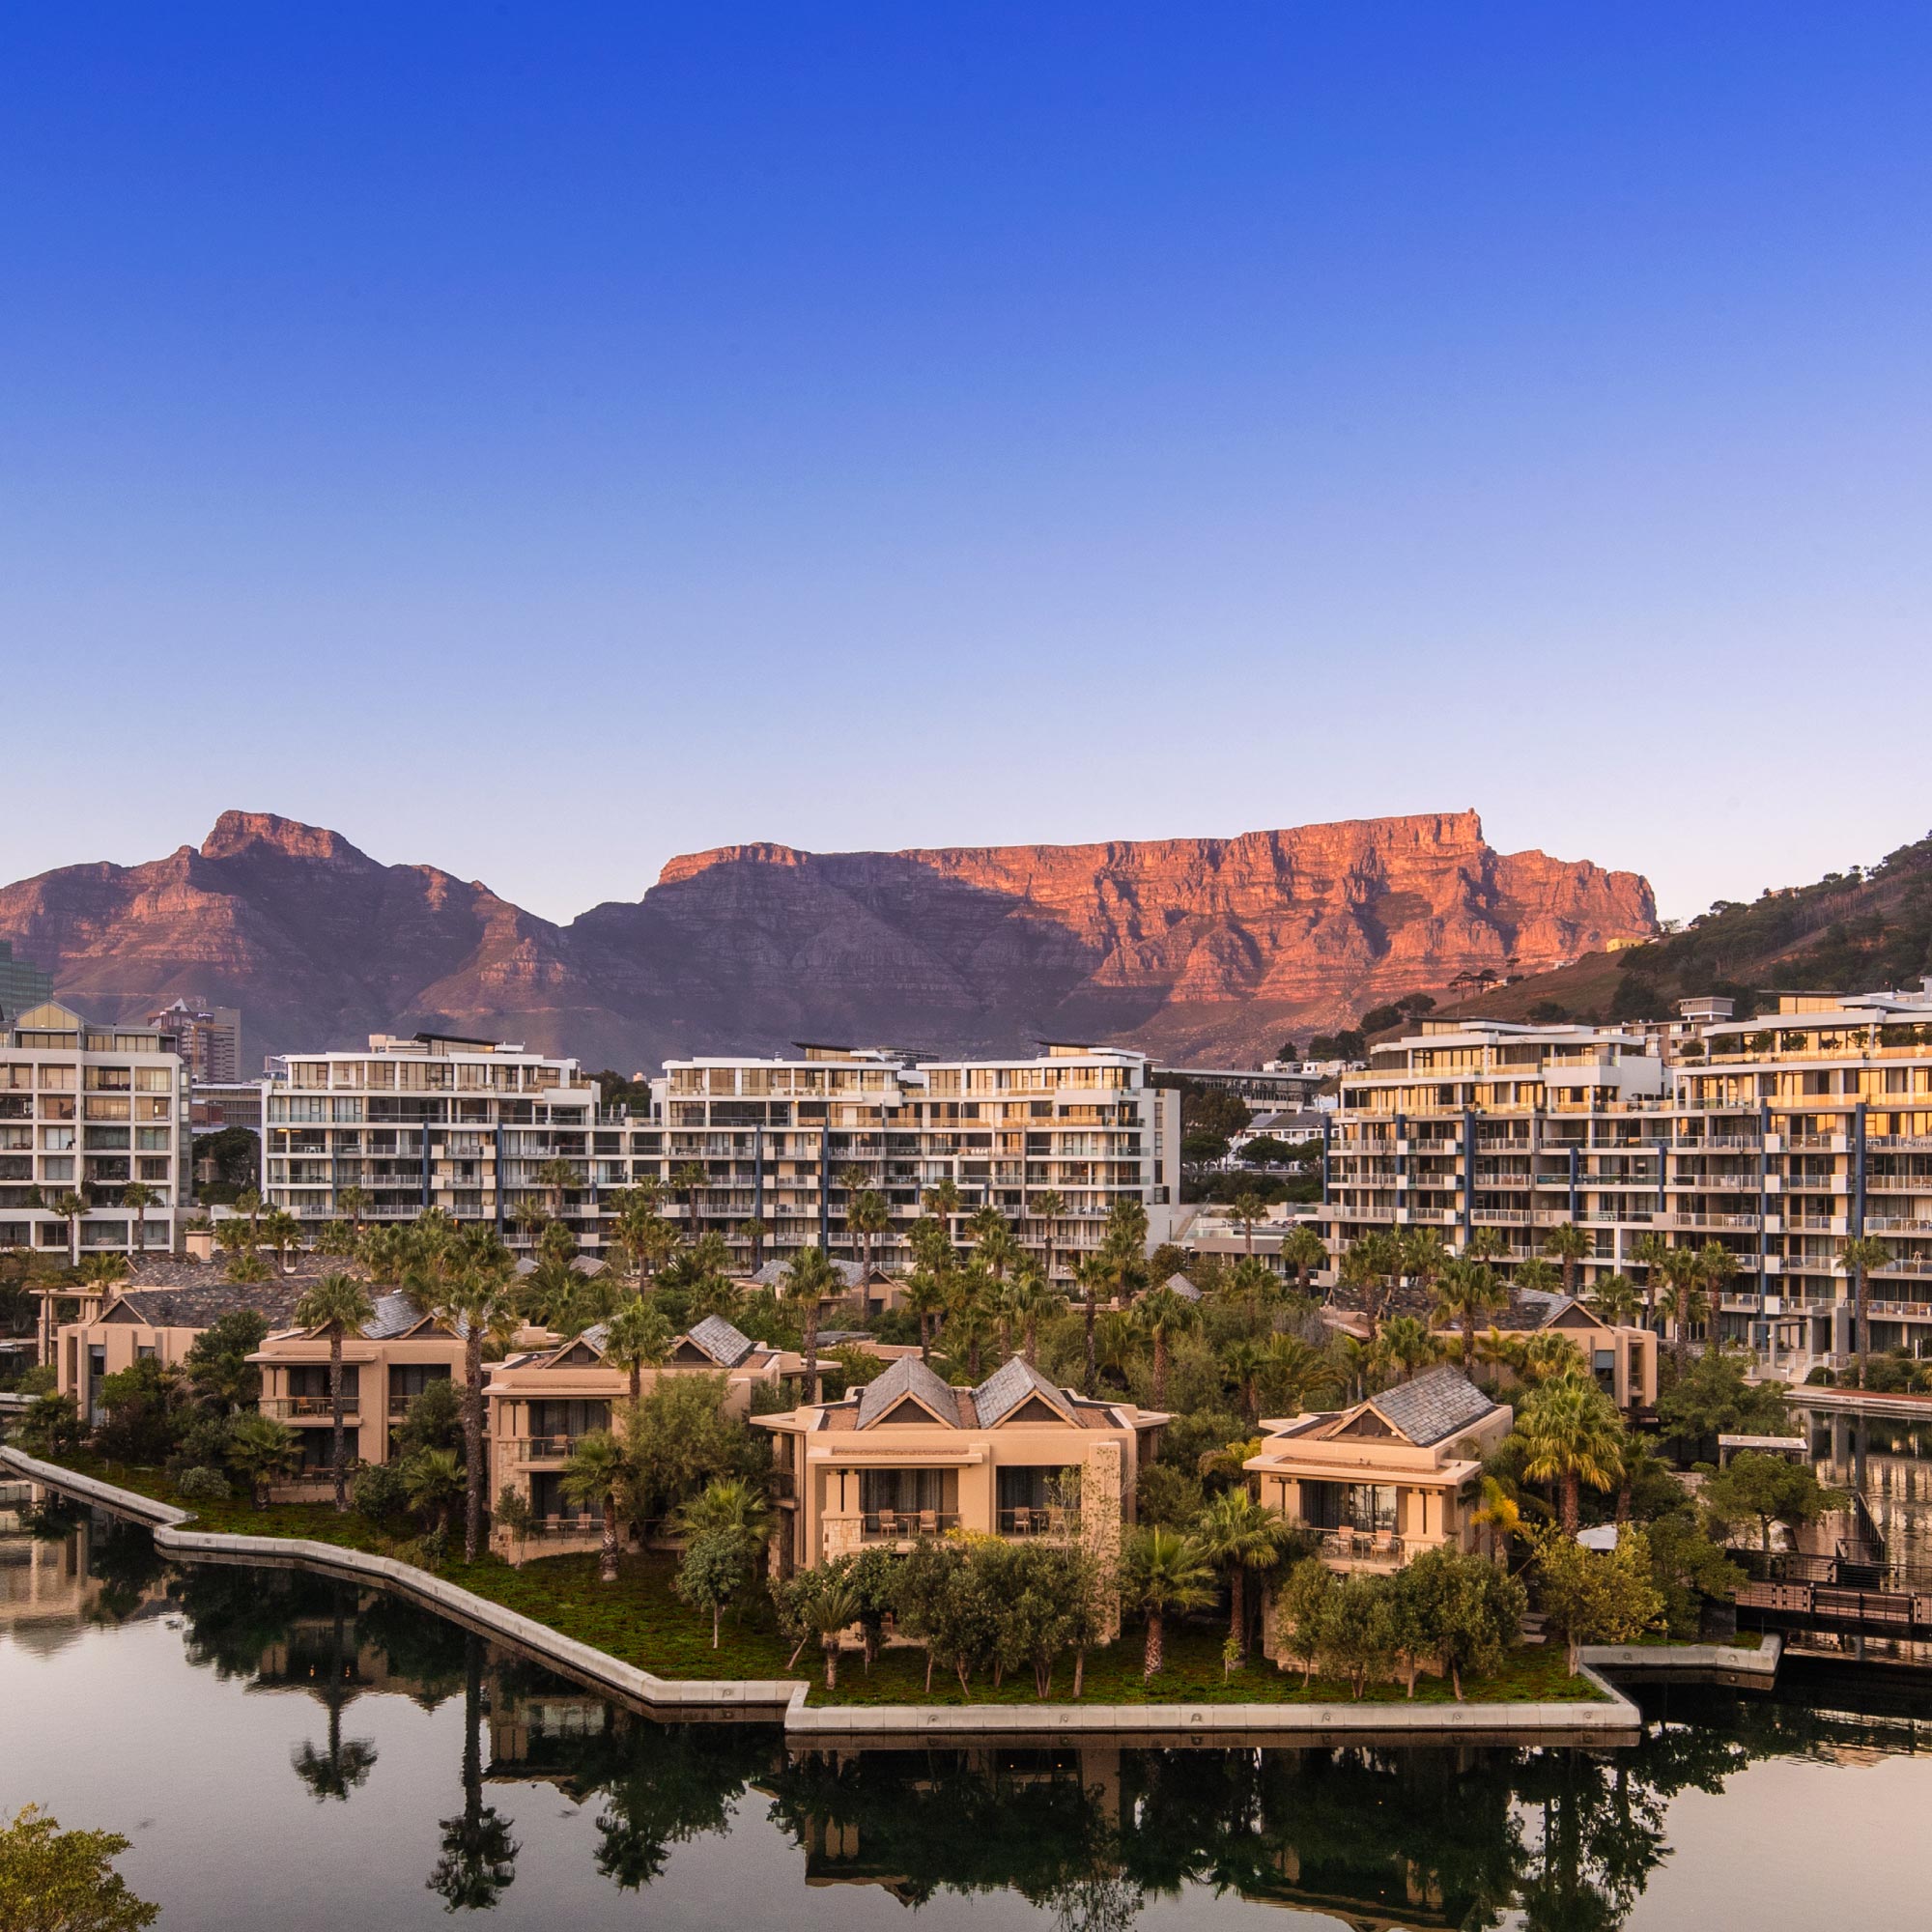 Luxurious stay at the One & Only Cape Town, located at the Victoria and Alfred Waterfront with stunning views of Table Mountain and a sophisticated, modern design.